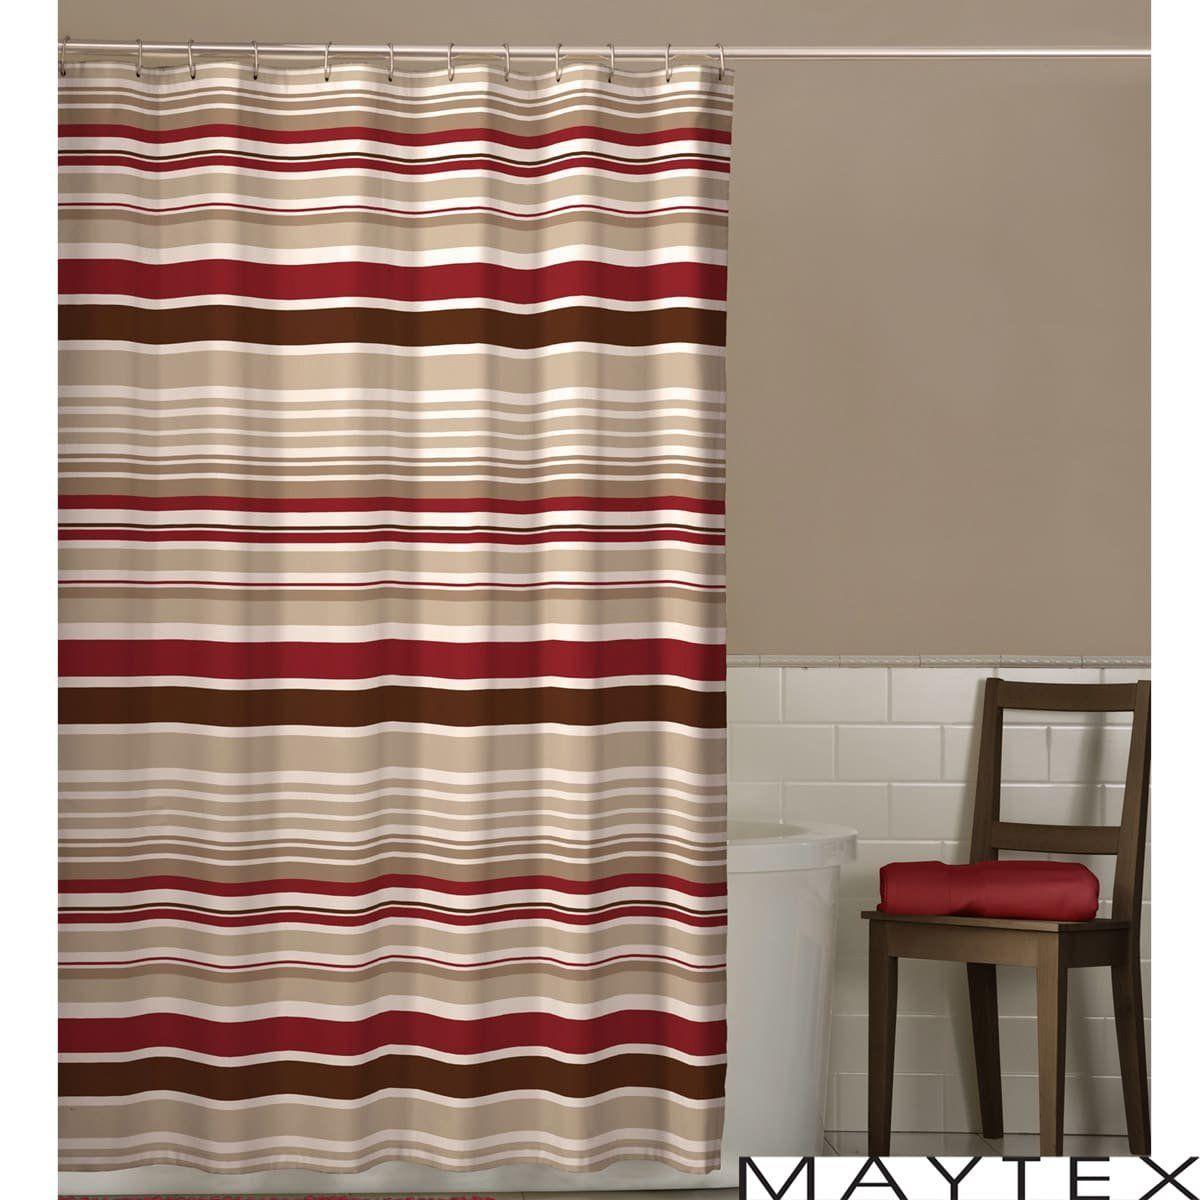 Tart reccomend Red striped shower curtain